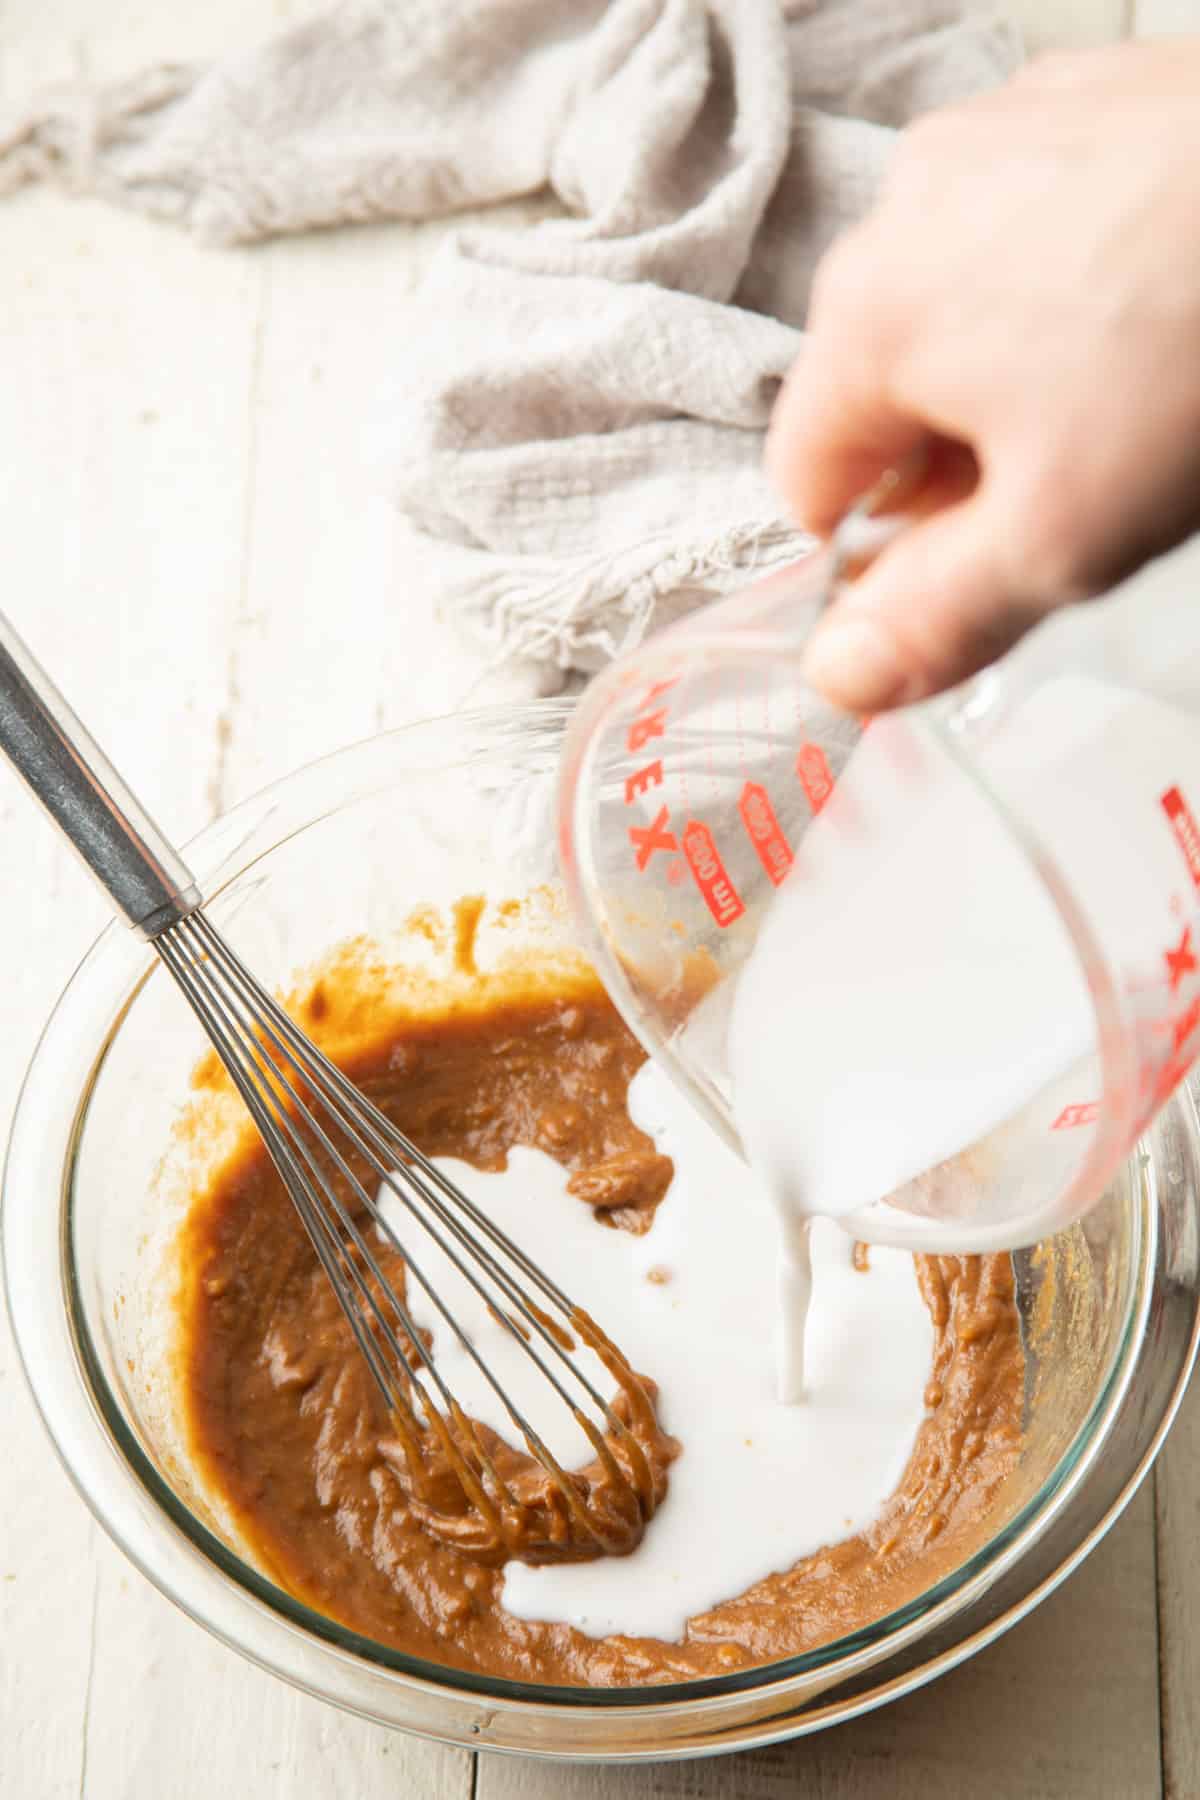 Hand pouring coconut milk into a bowl of ingredients for making Vegan Peanut Sauce.